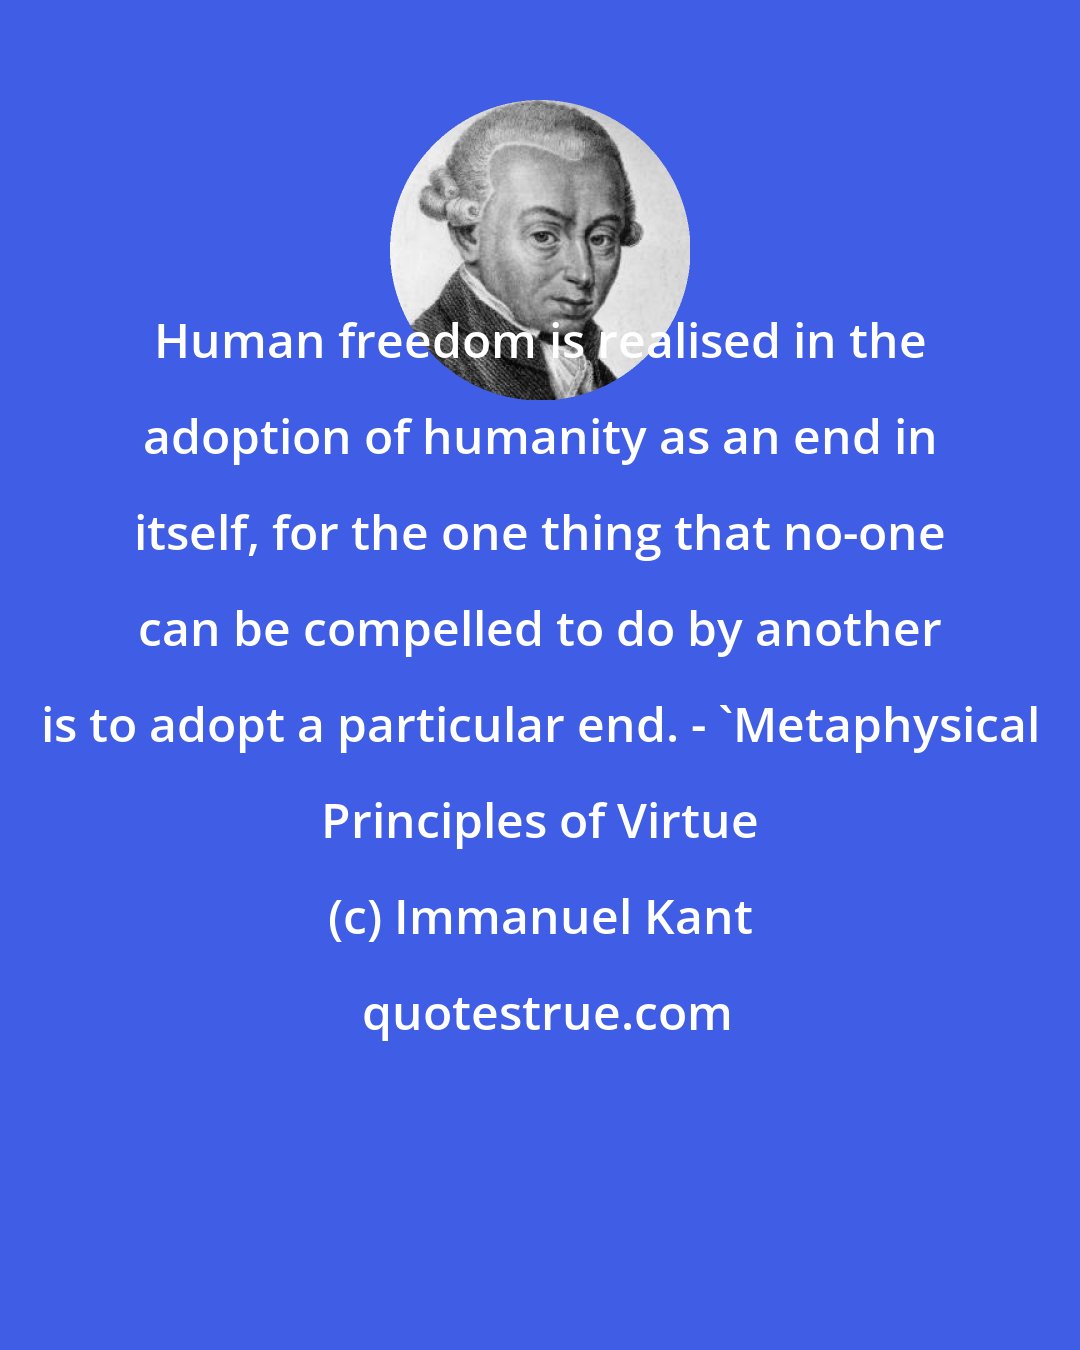 Immanuel Kant: Human freedom is realised in the adoption of humanity as an end in itself, for the one thing that no-one can be compelled to do by another is to adopt a particular end. - 'Metaphysical Principles of Virtue